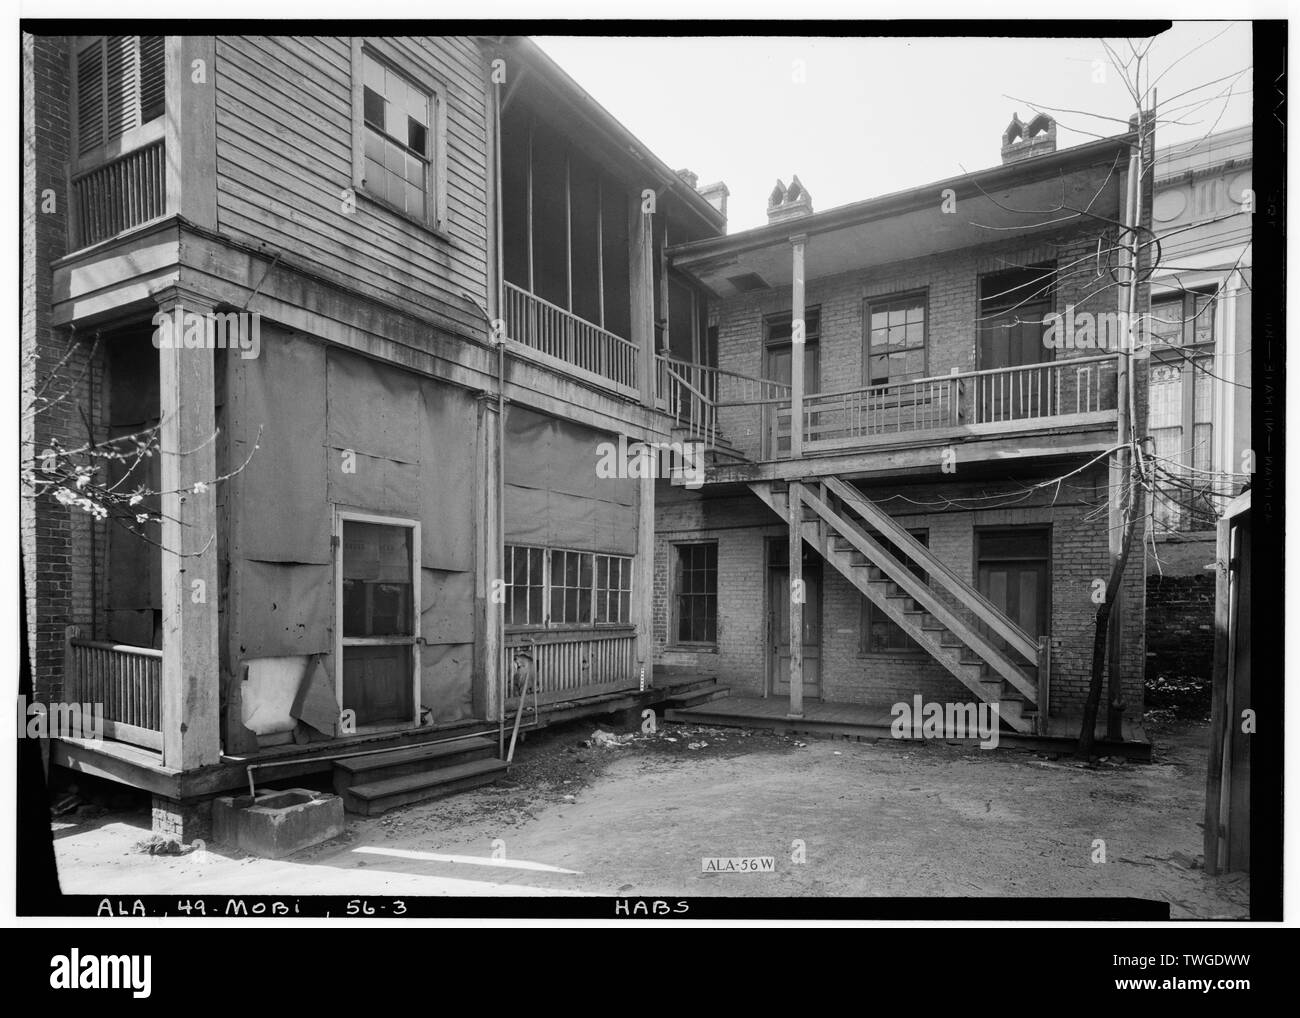 Historic American Buildings Survey E. W. Russell, Photographer, March 24, 1936 REAR VIEW (EAST EXTENSION). USED FOR SERVANTS QUARTERS - Horta-Semmes House and Fence, 802 Government Street, Mobile, Mobile County, AL Stock Photo